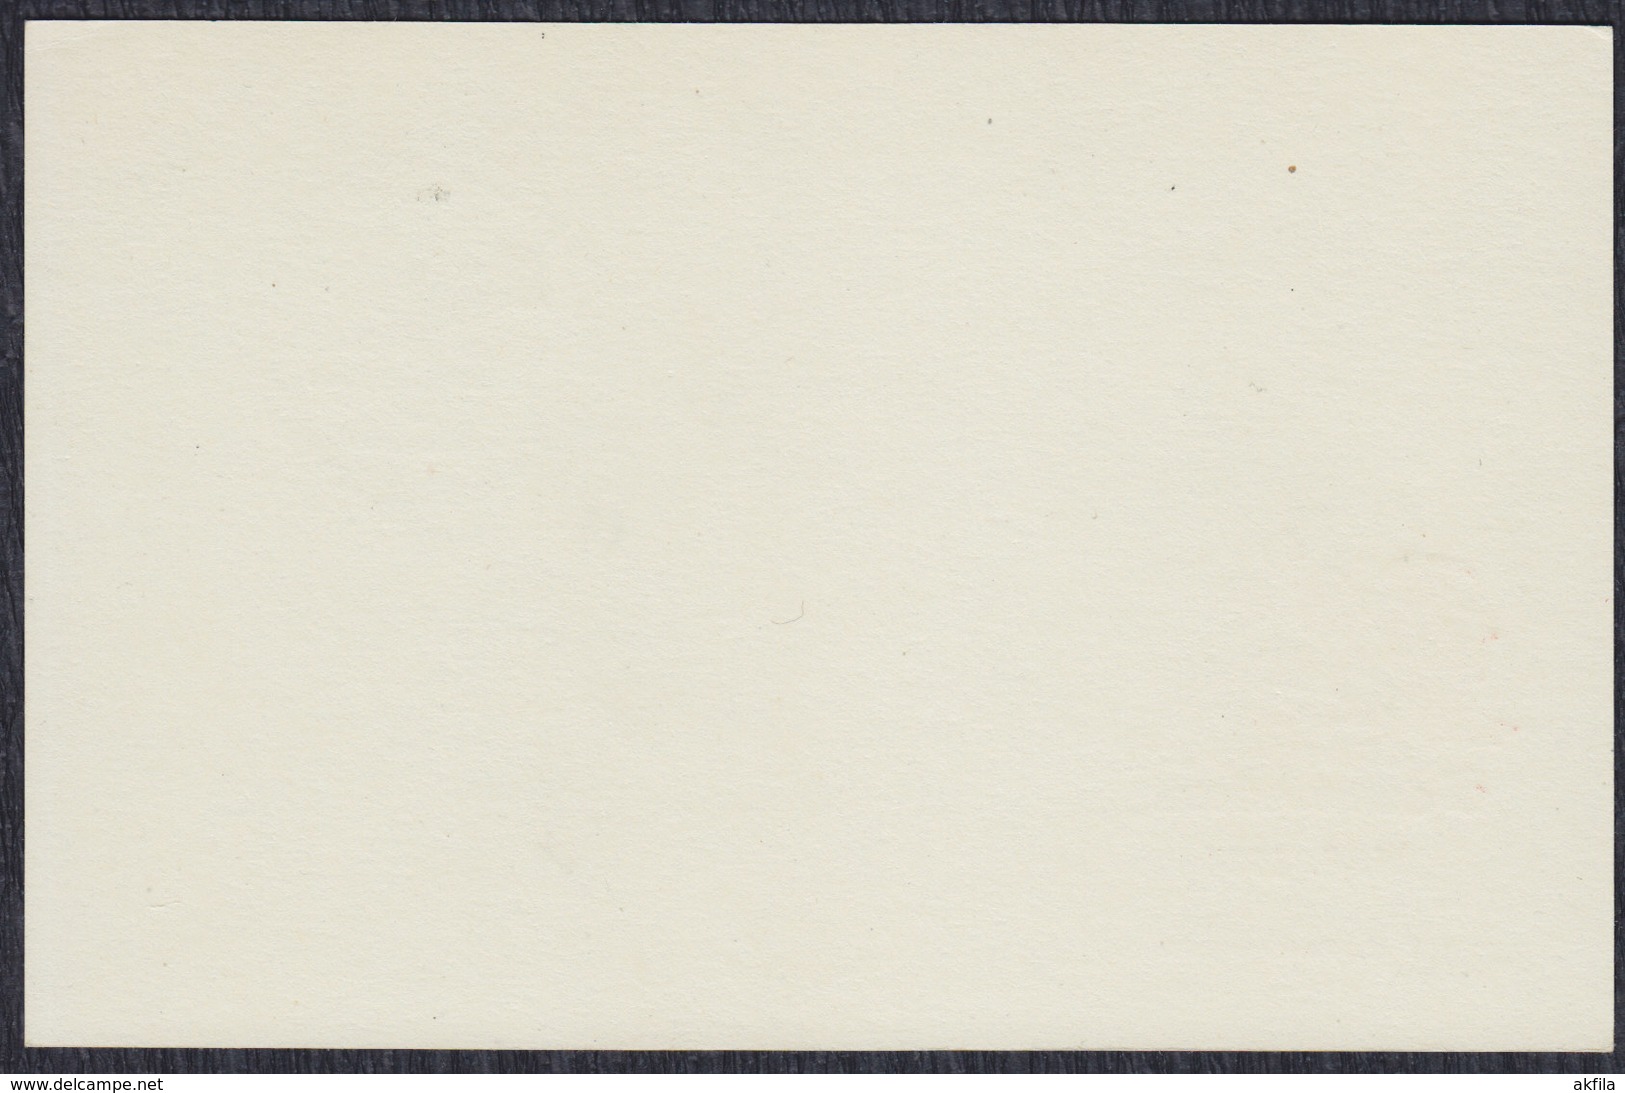 Yugoslavia 1984 Official Postal Stationery With Subsequent Text Added And Image - Ganzsachen